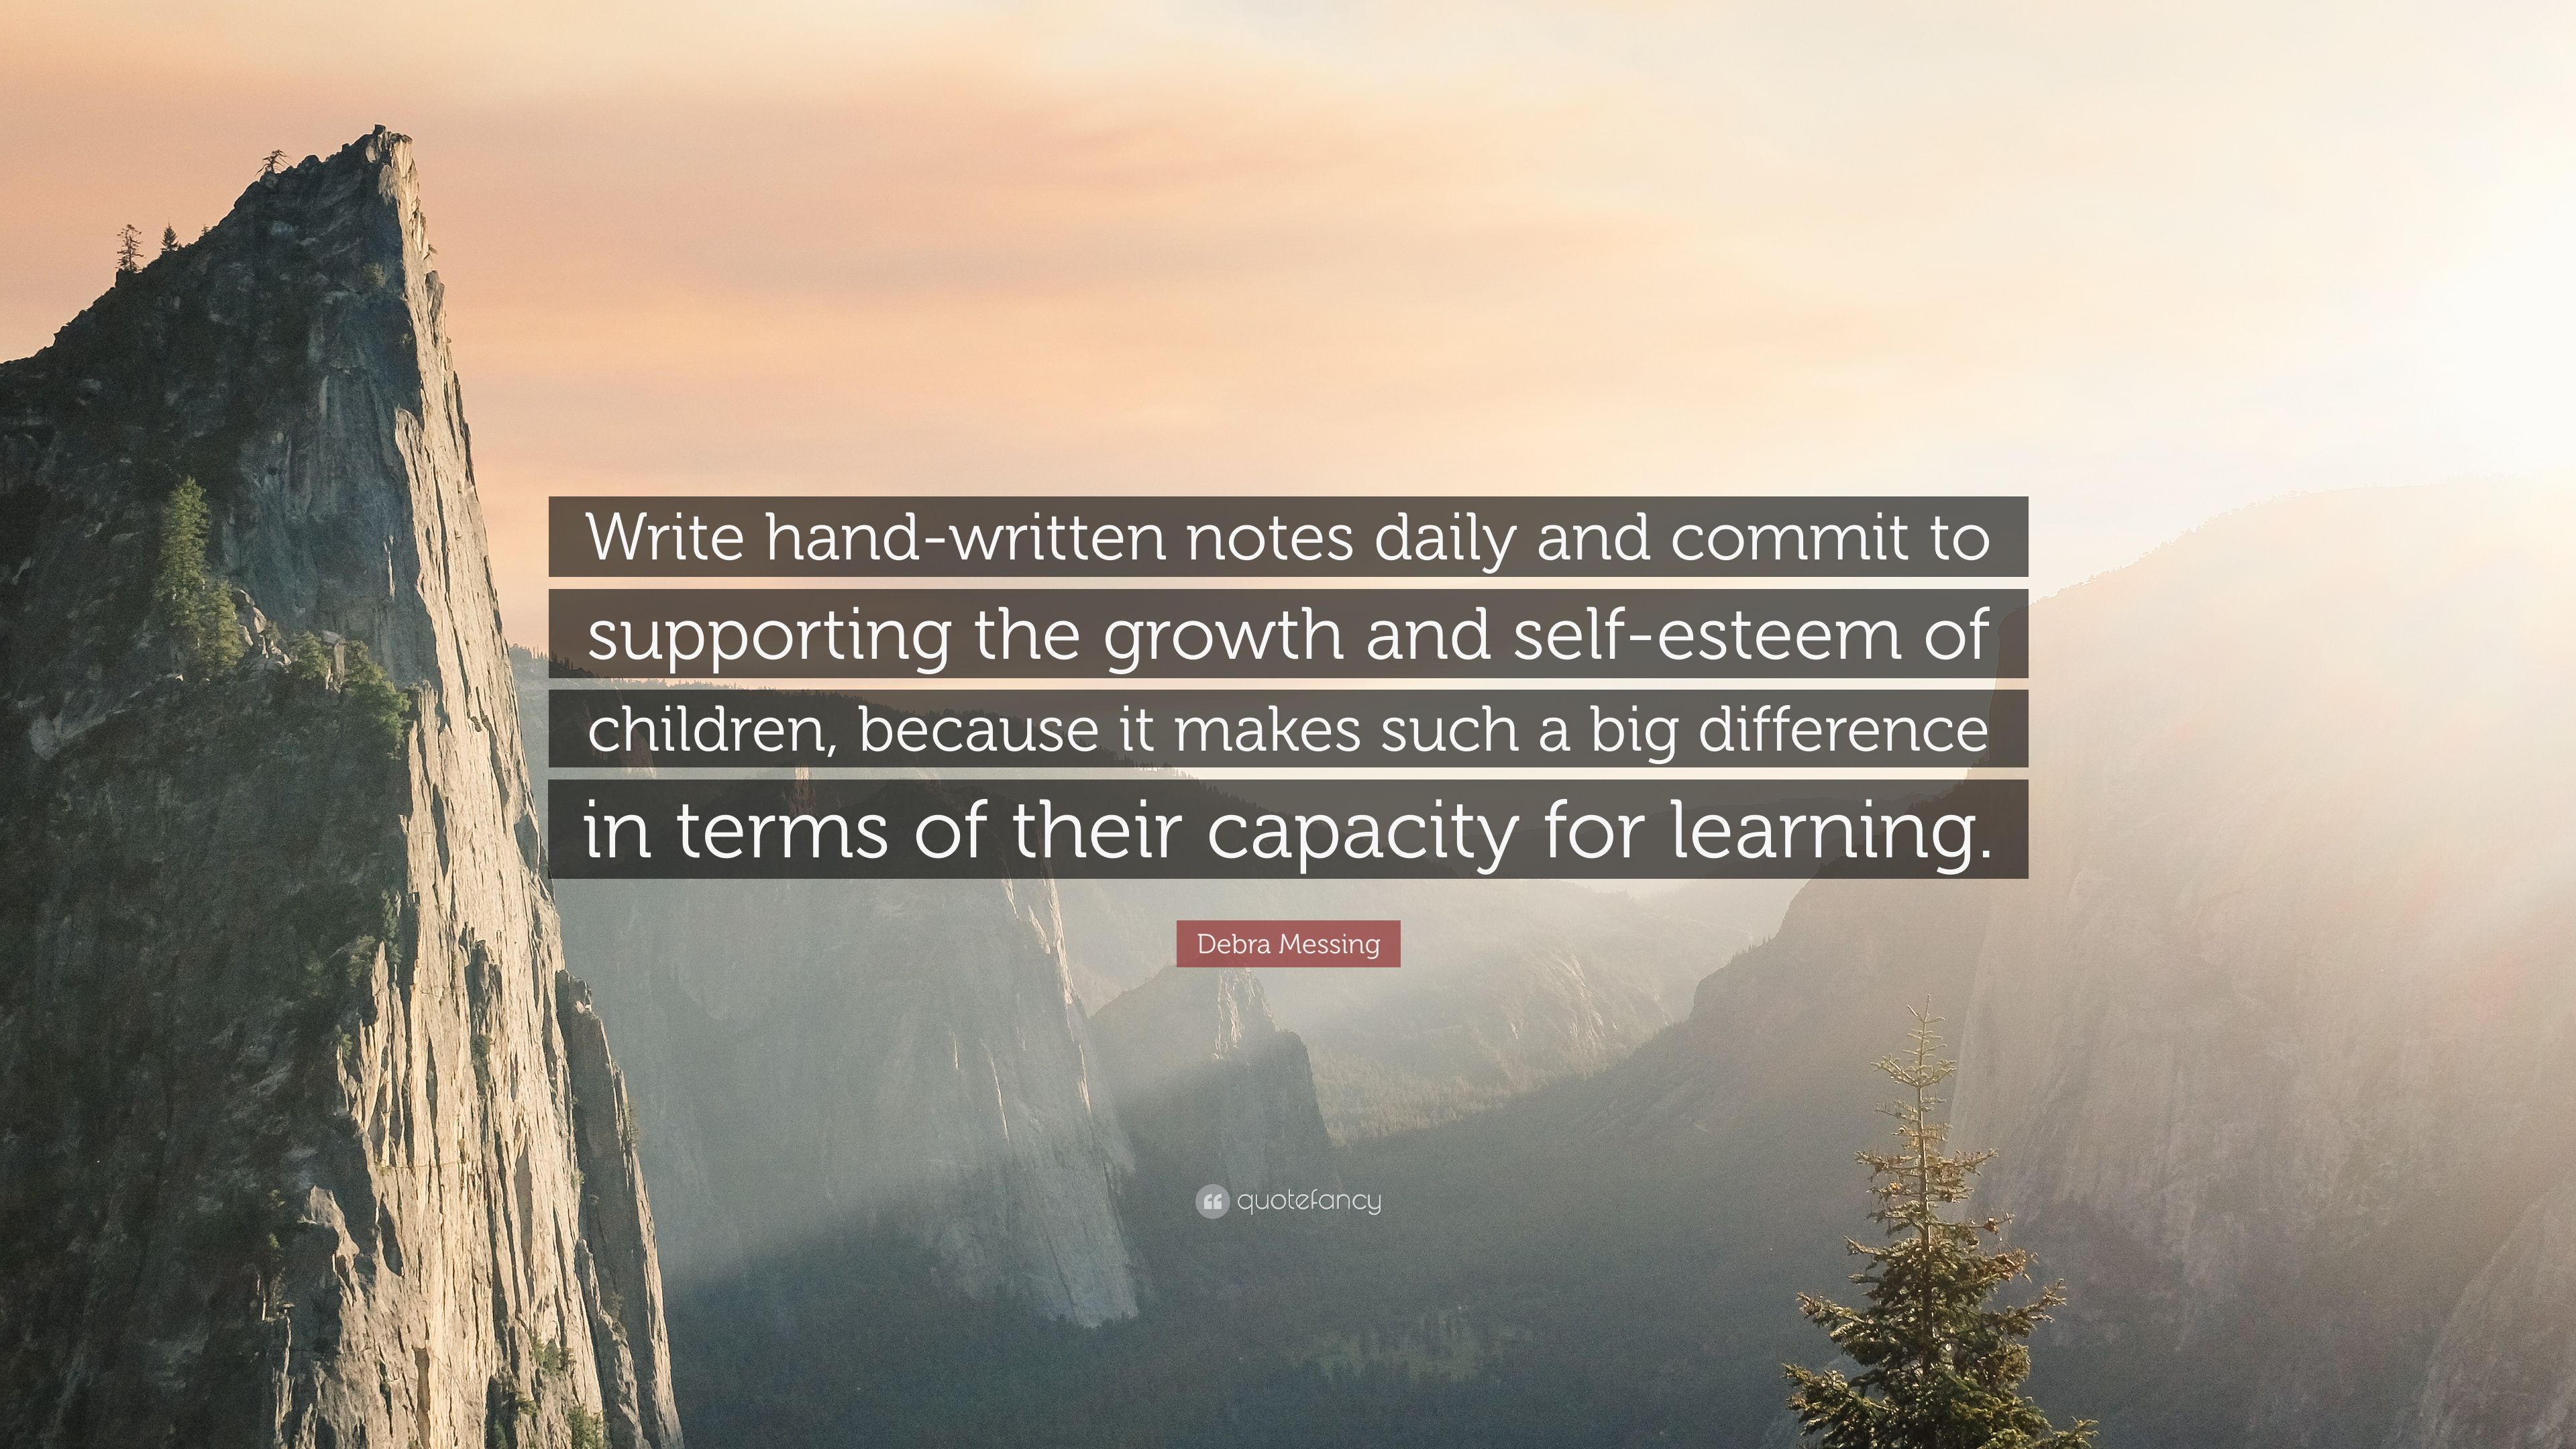 Debra Messing Quote: “Write Hand Written Notes Daily And Commit To Supporting The Growth And Self Esteem Of Children, Because It Makes Such A .” (7 Wallpaper)